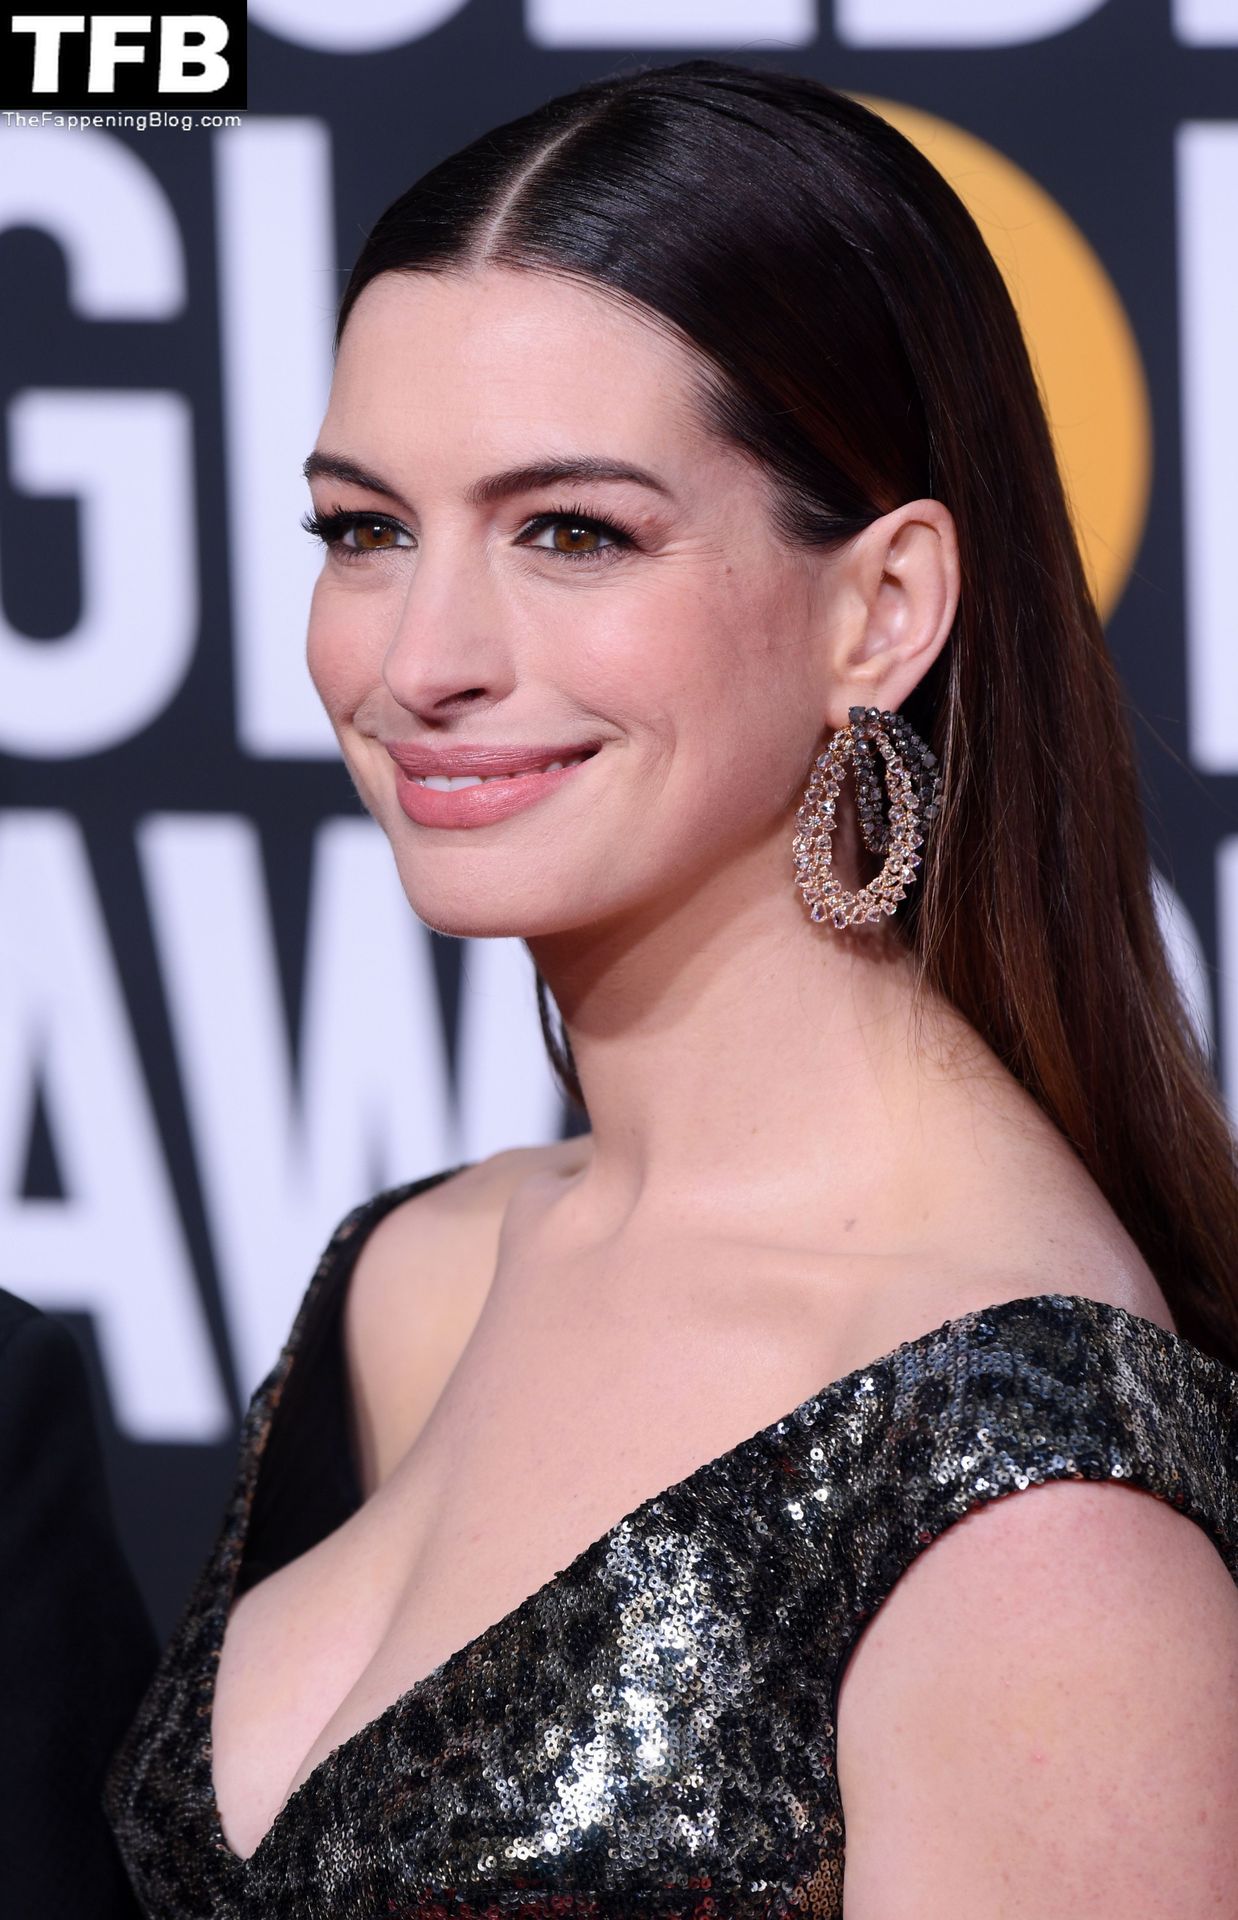 anne-hathaway-cleavage-539027-thefappeningblog.com_.jpg